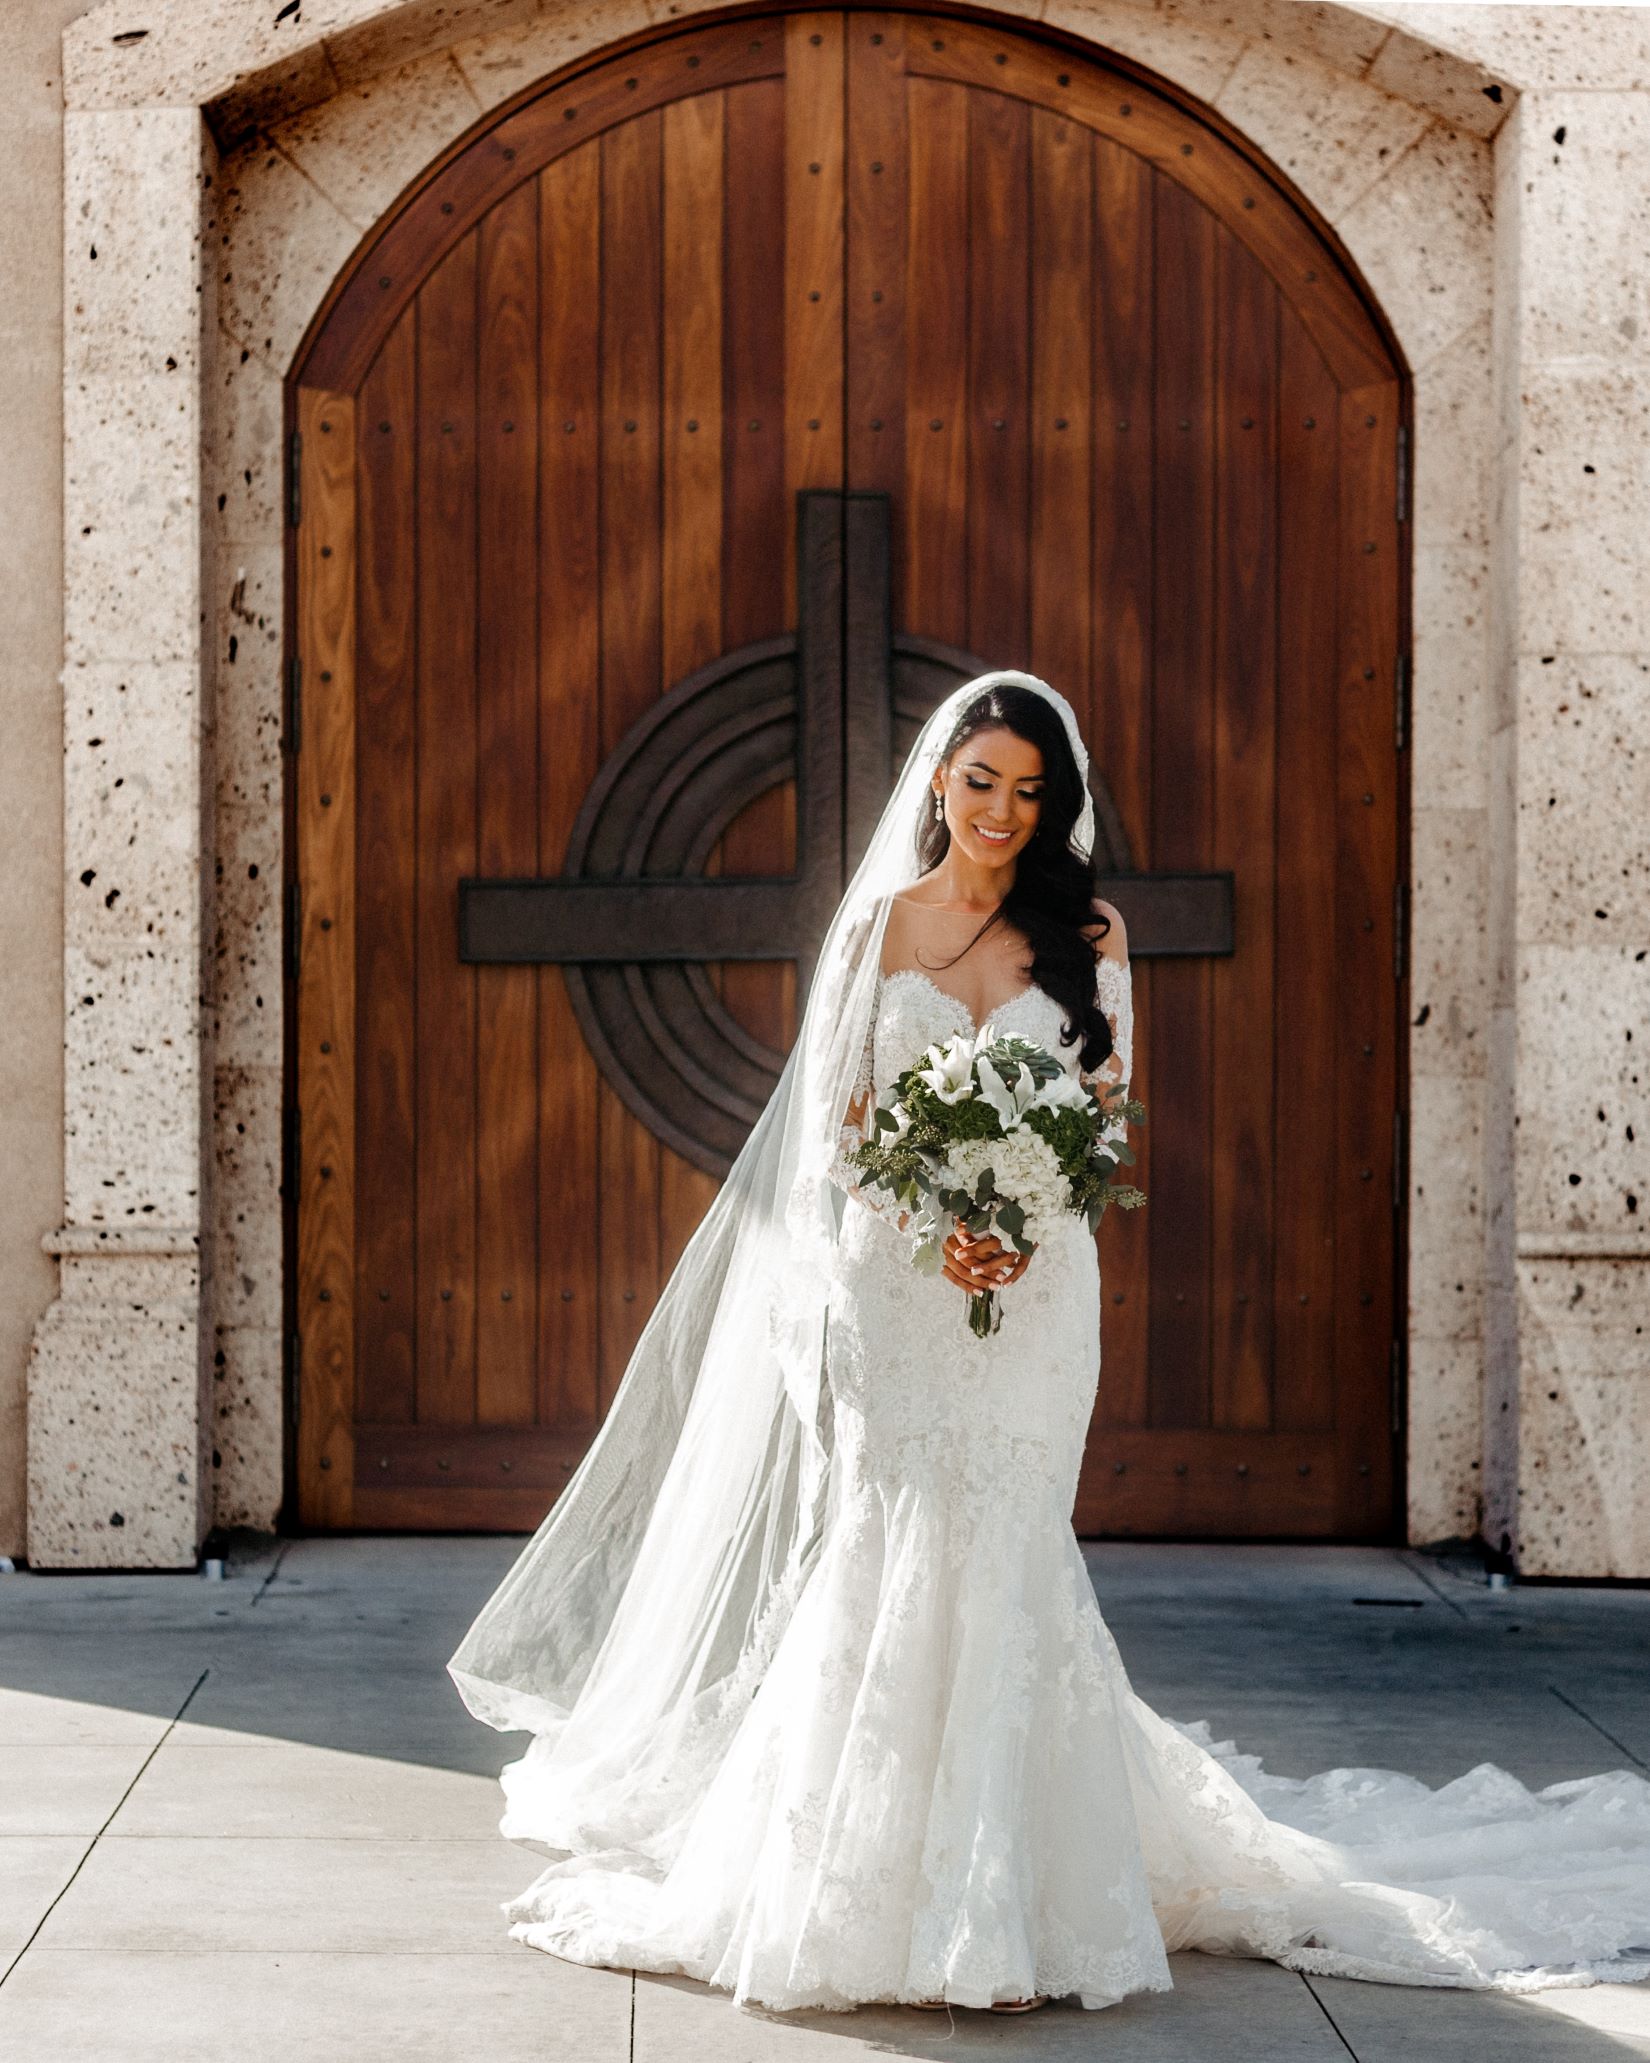 An image of a bride standing outside a church.